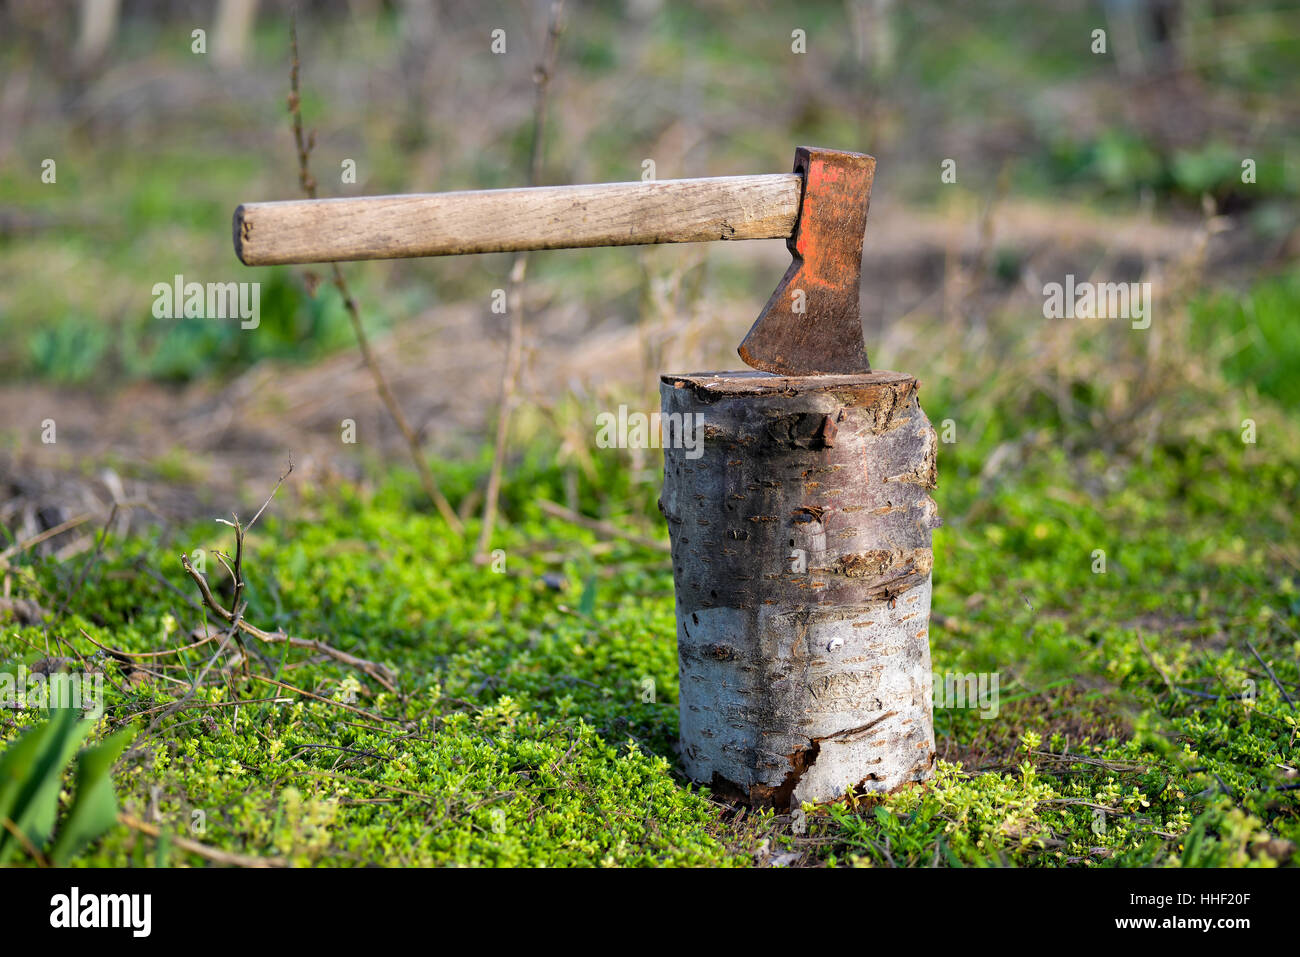 Ax on the stump in natural light Stock Photo